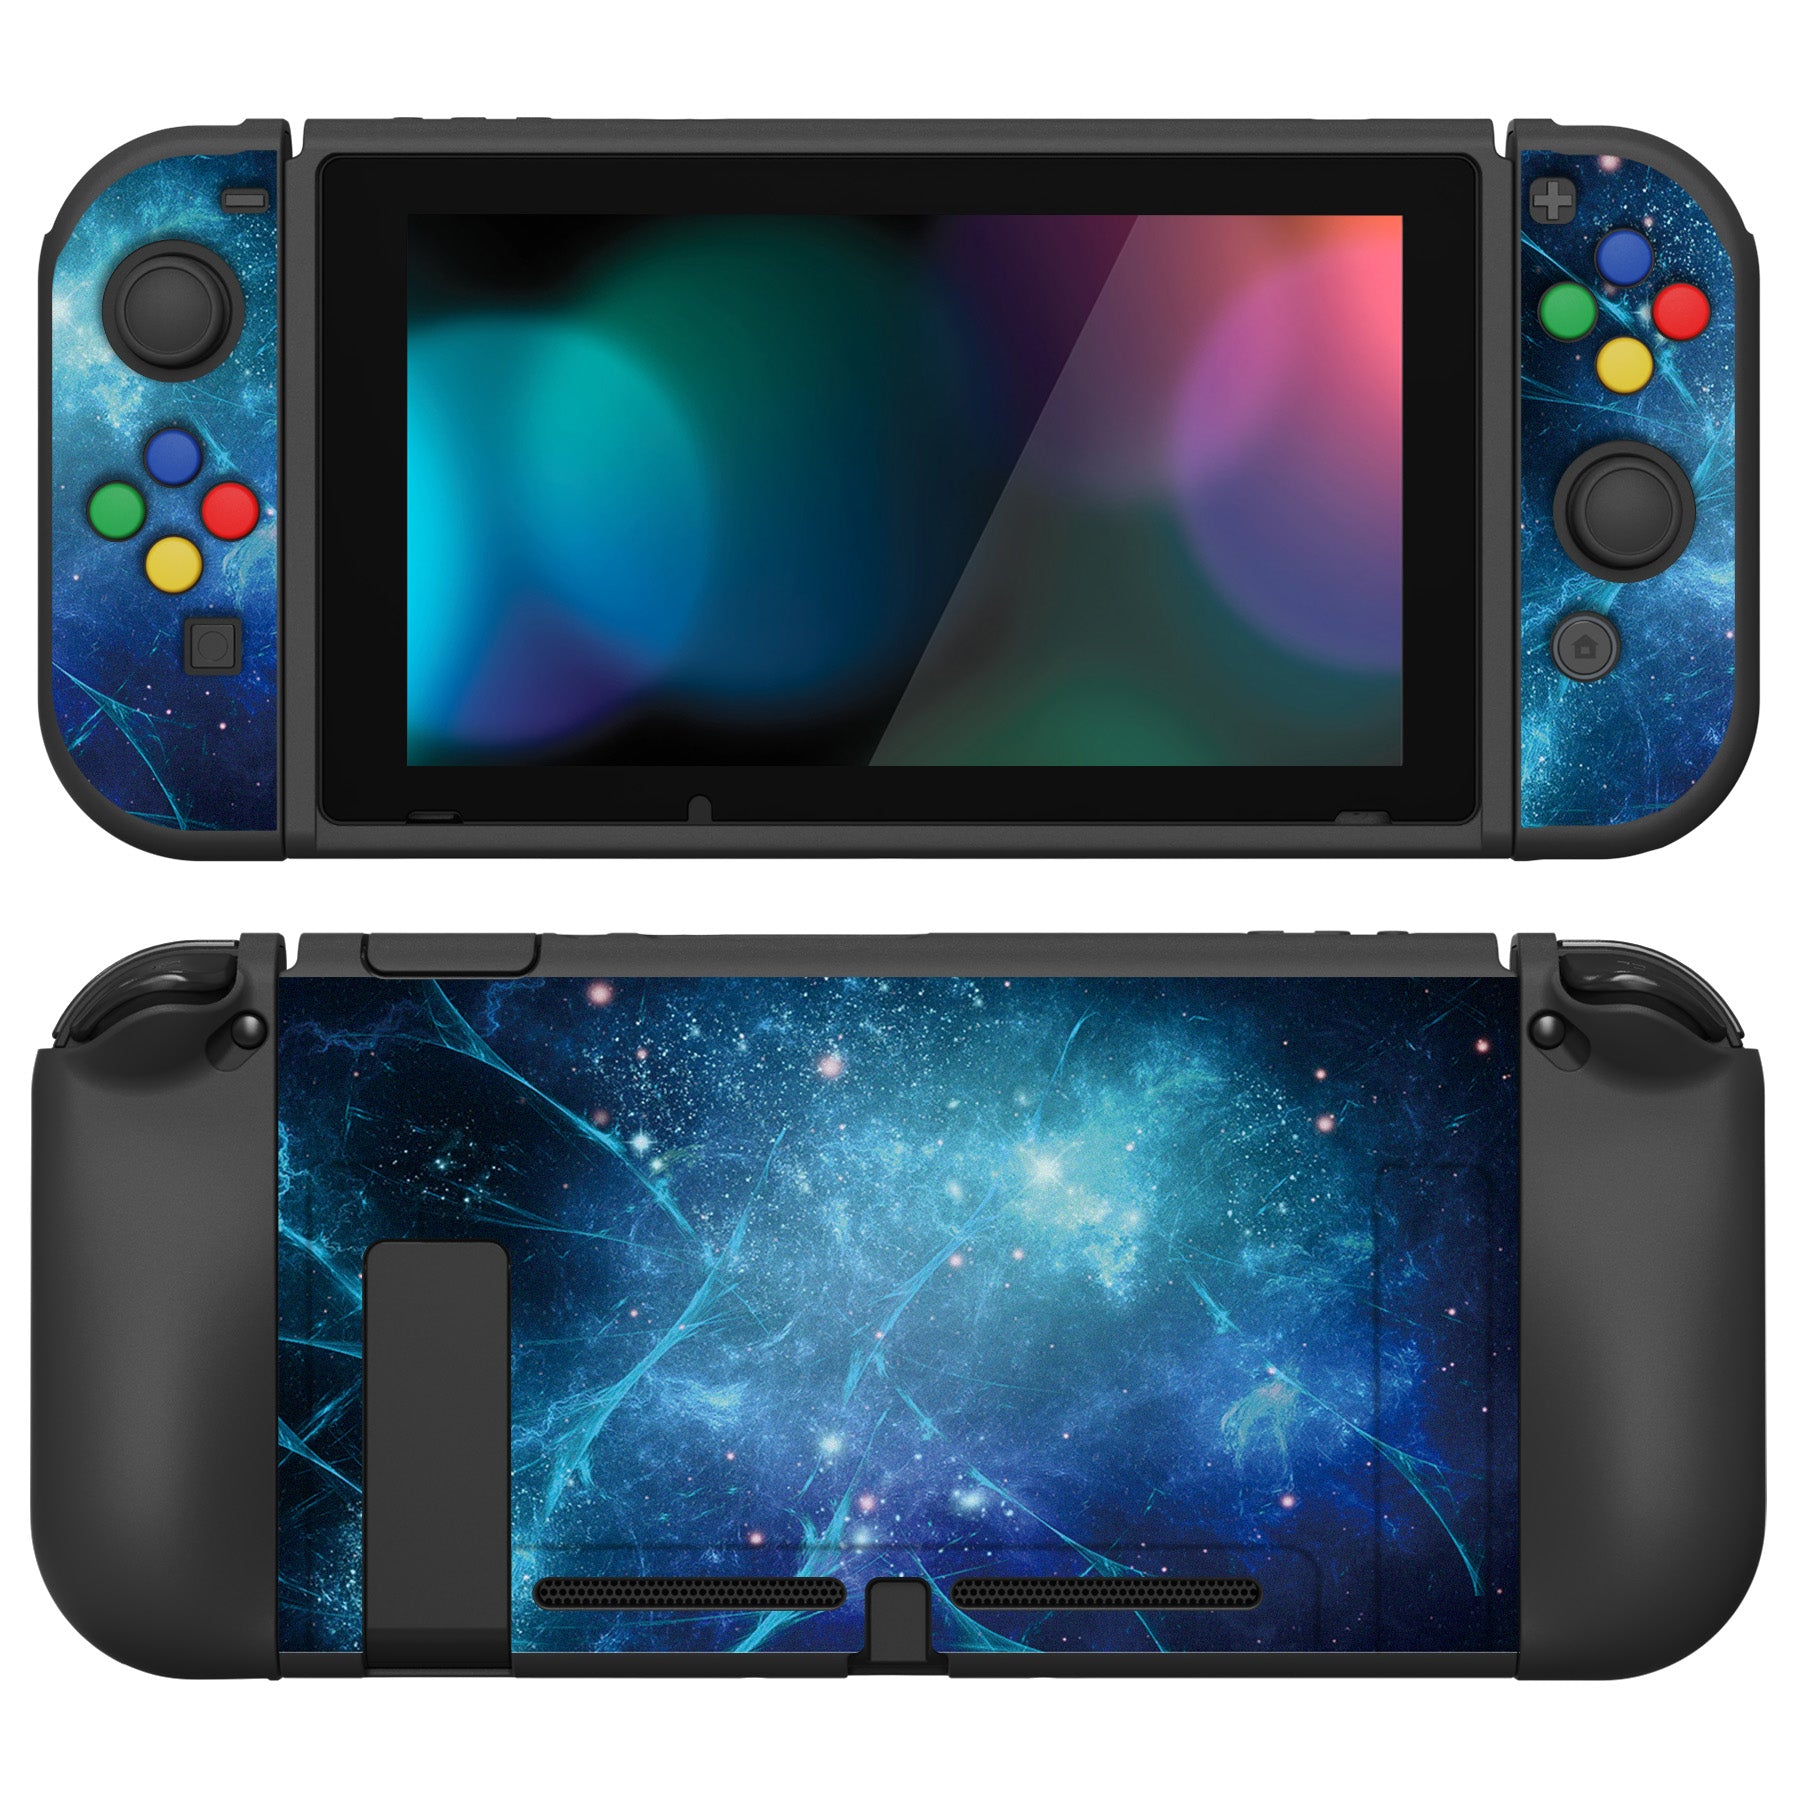 PlayVital ZealProtect Soft Protective Case for Nintendo Switch, Flexible Cover for Switch with Tempered Glass Screen Protector & Thumb Grips & ABXY Direction Button Caps - Blue Nebula - RNSYV6002 playvital